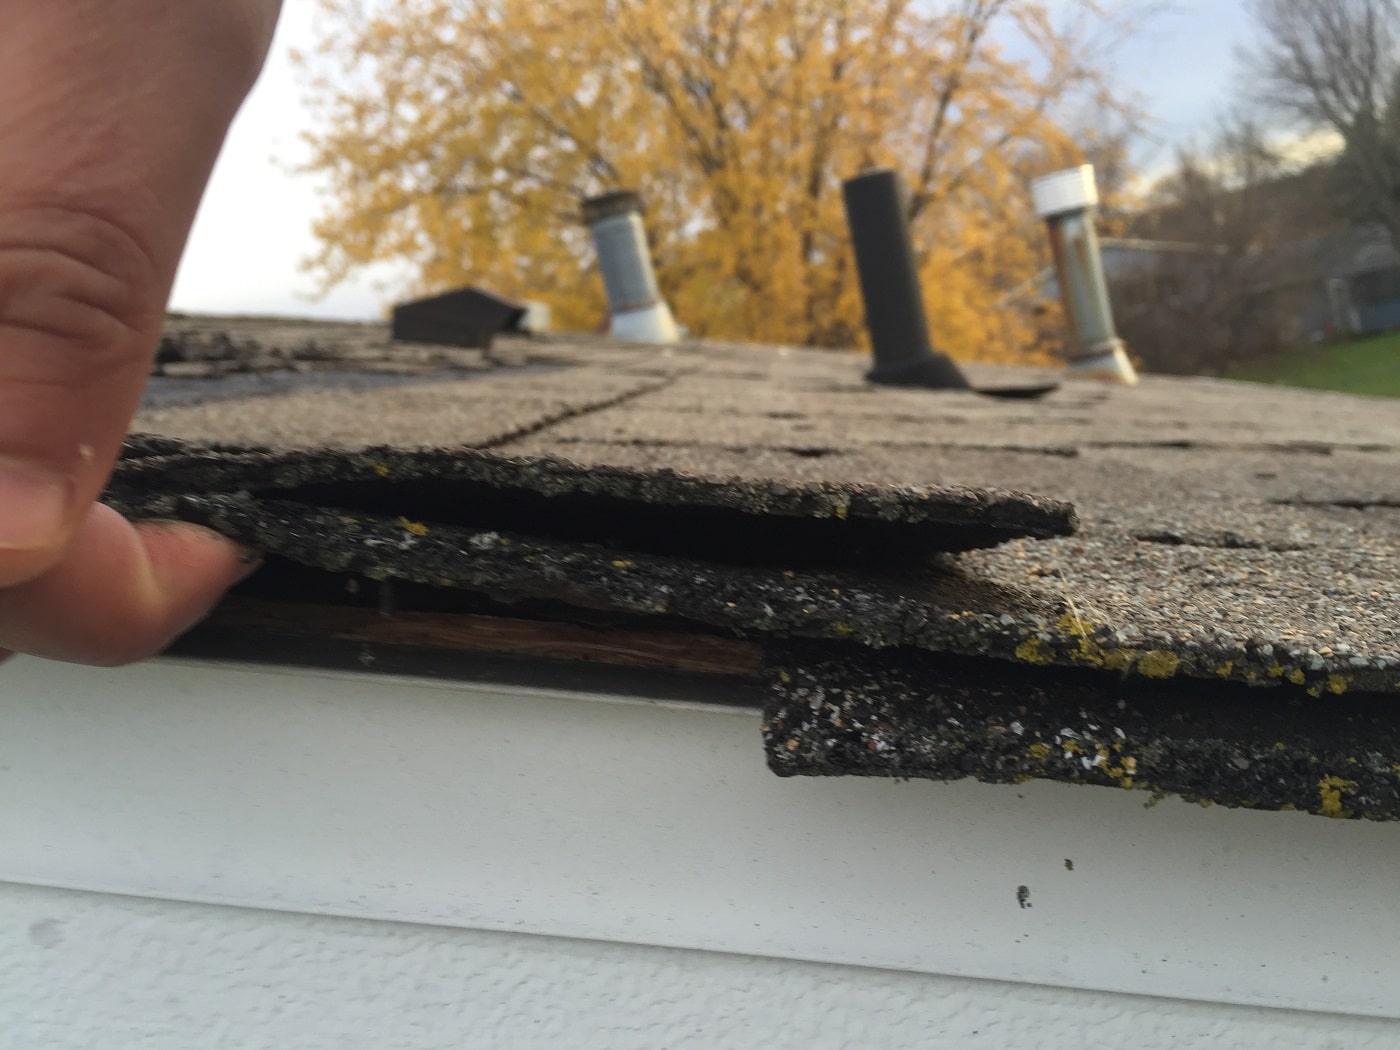 Roofing shingles with curling, water-damaged edges